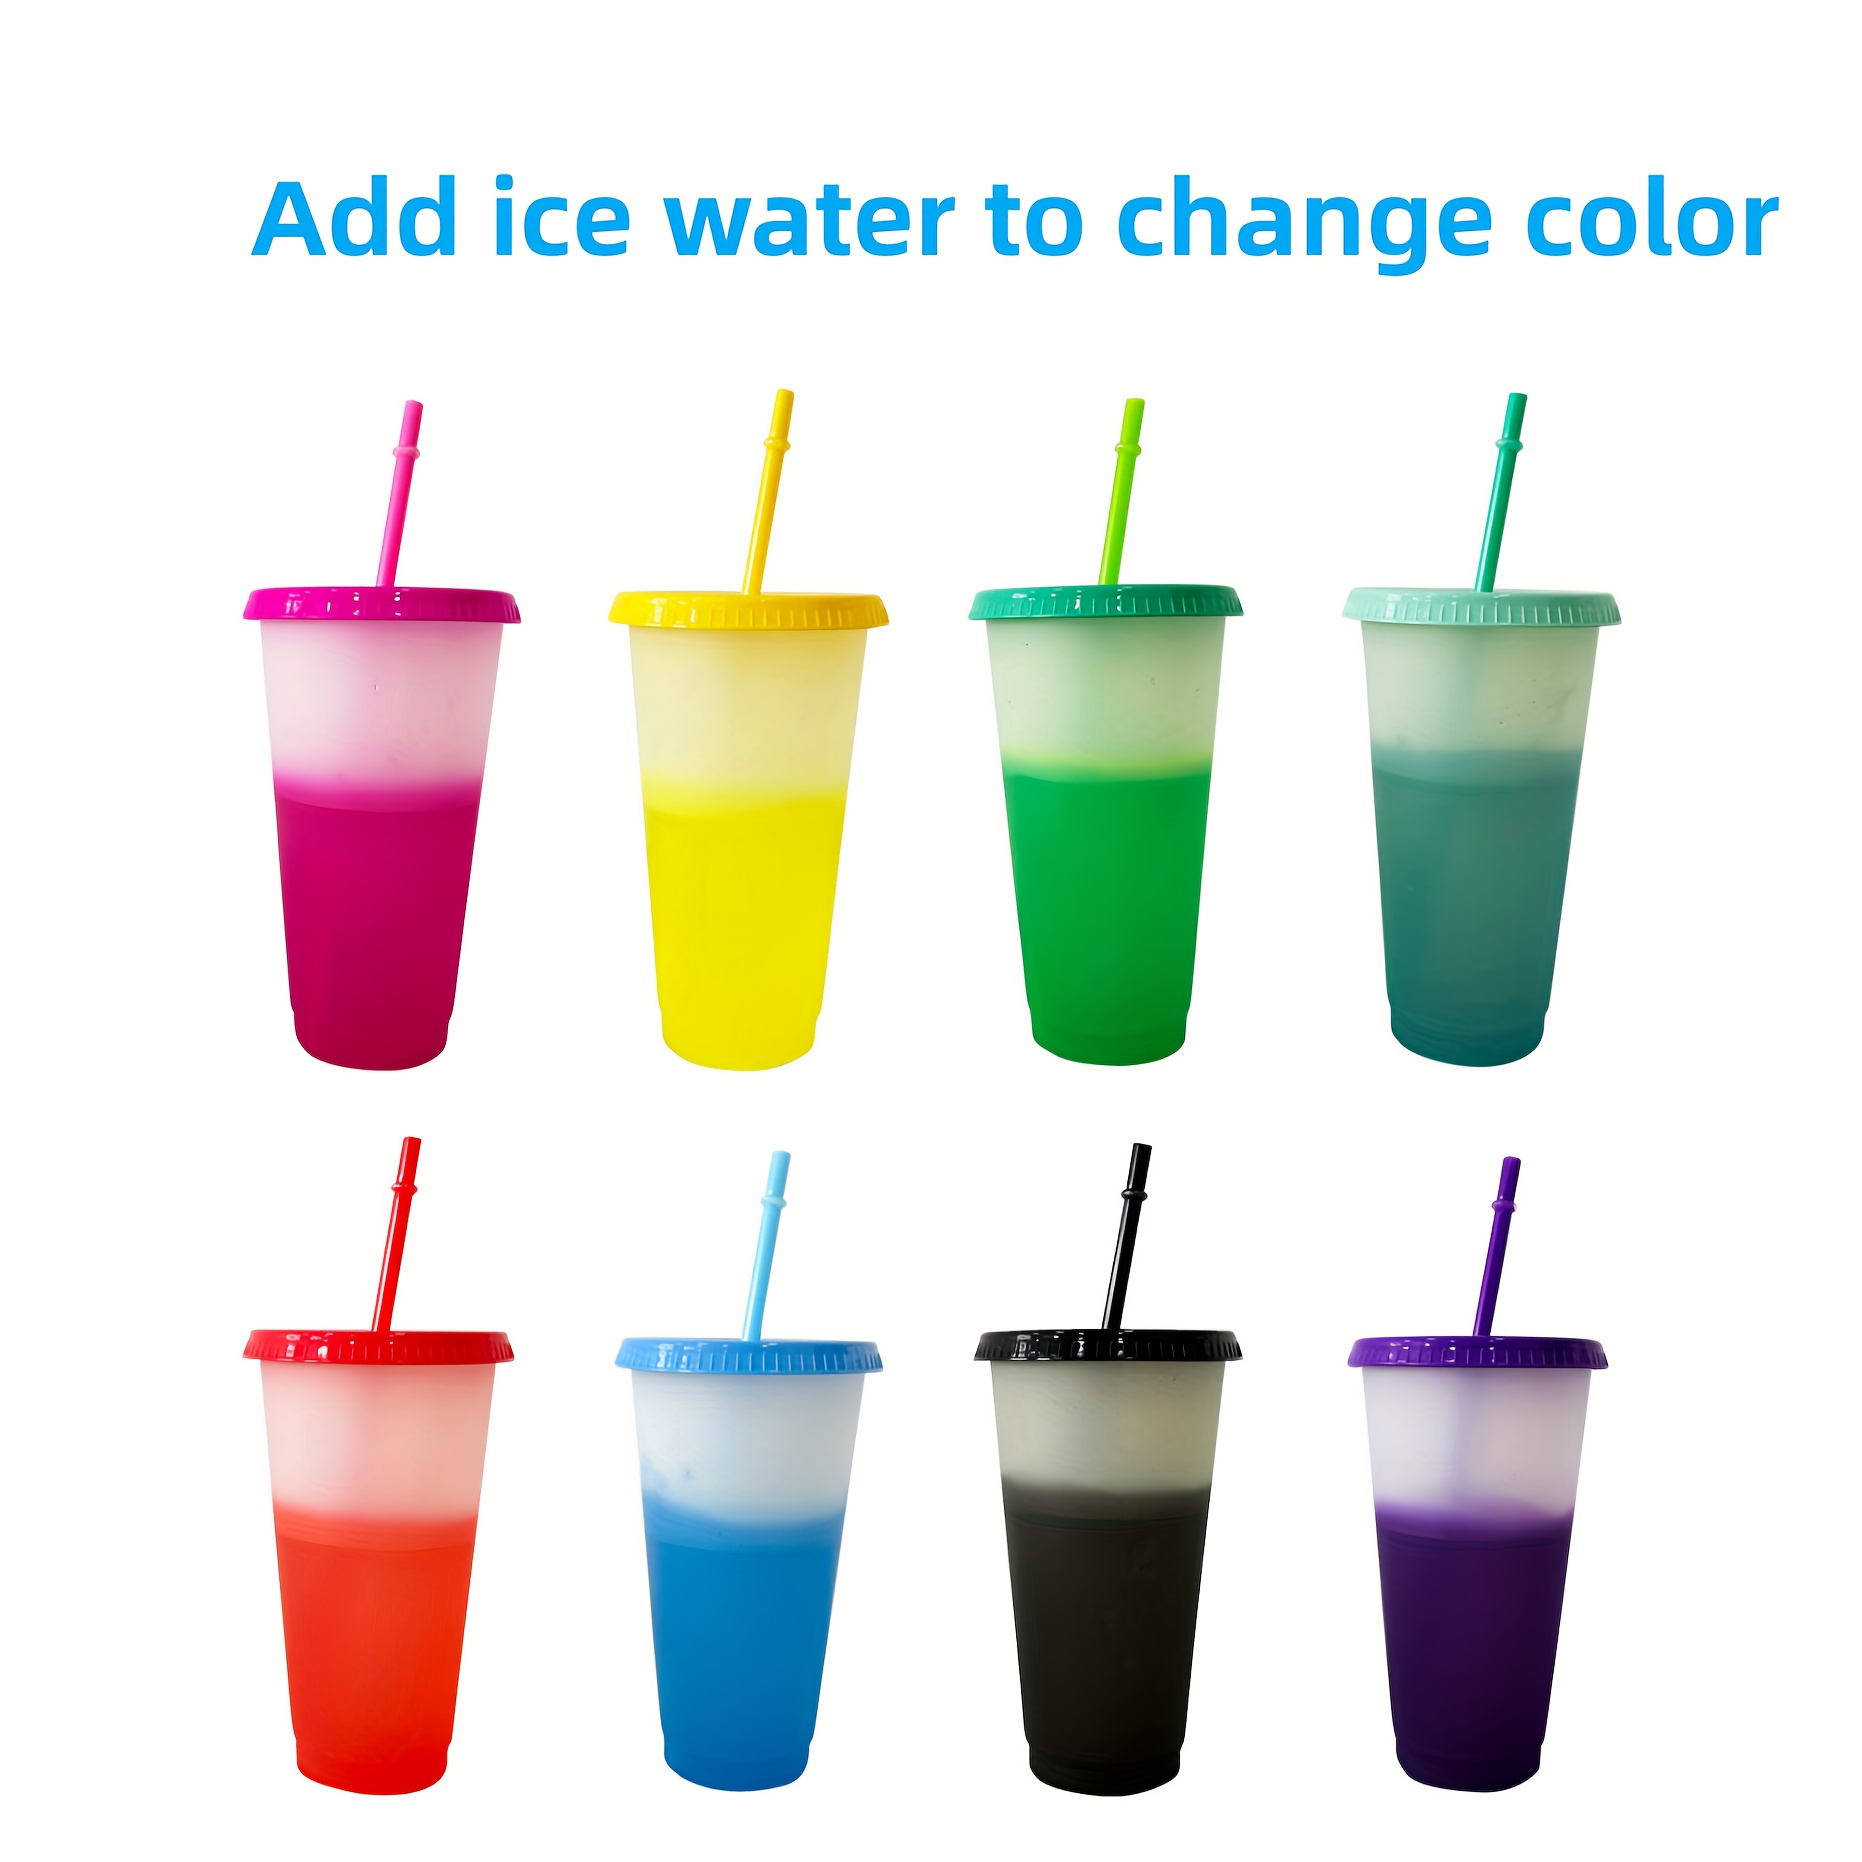 Color Changing Plastic Cups With Lids And Straws, Perfect For